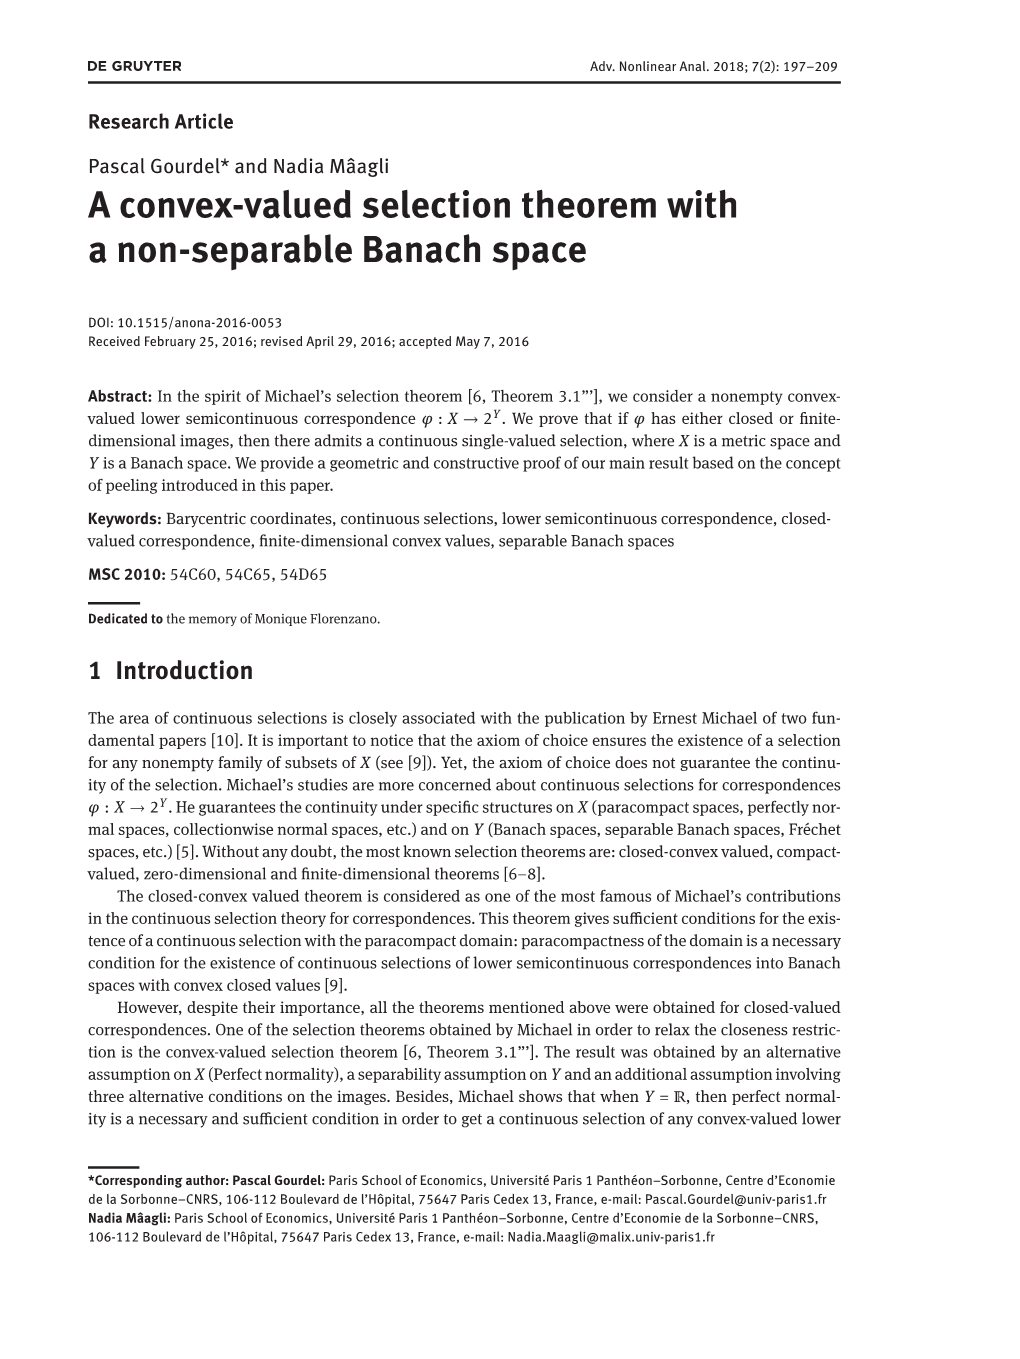 A Convex-Valued Selection Theorem with a Non-Separable Banach Space